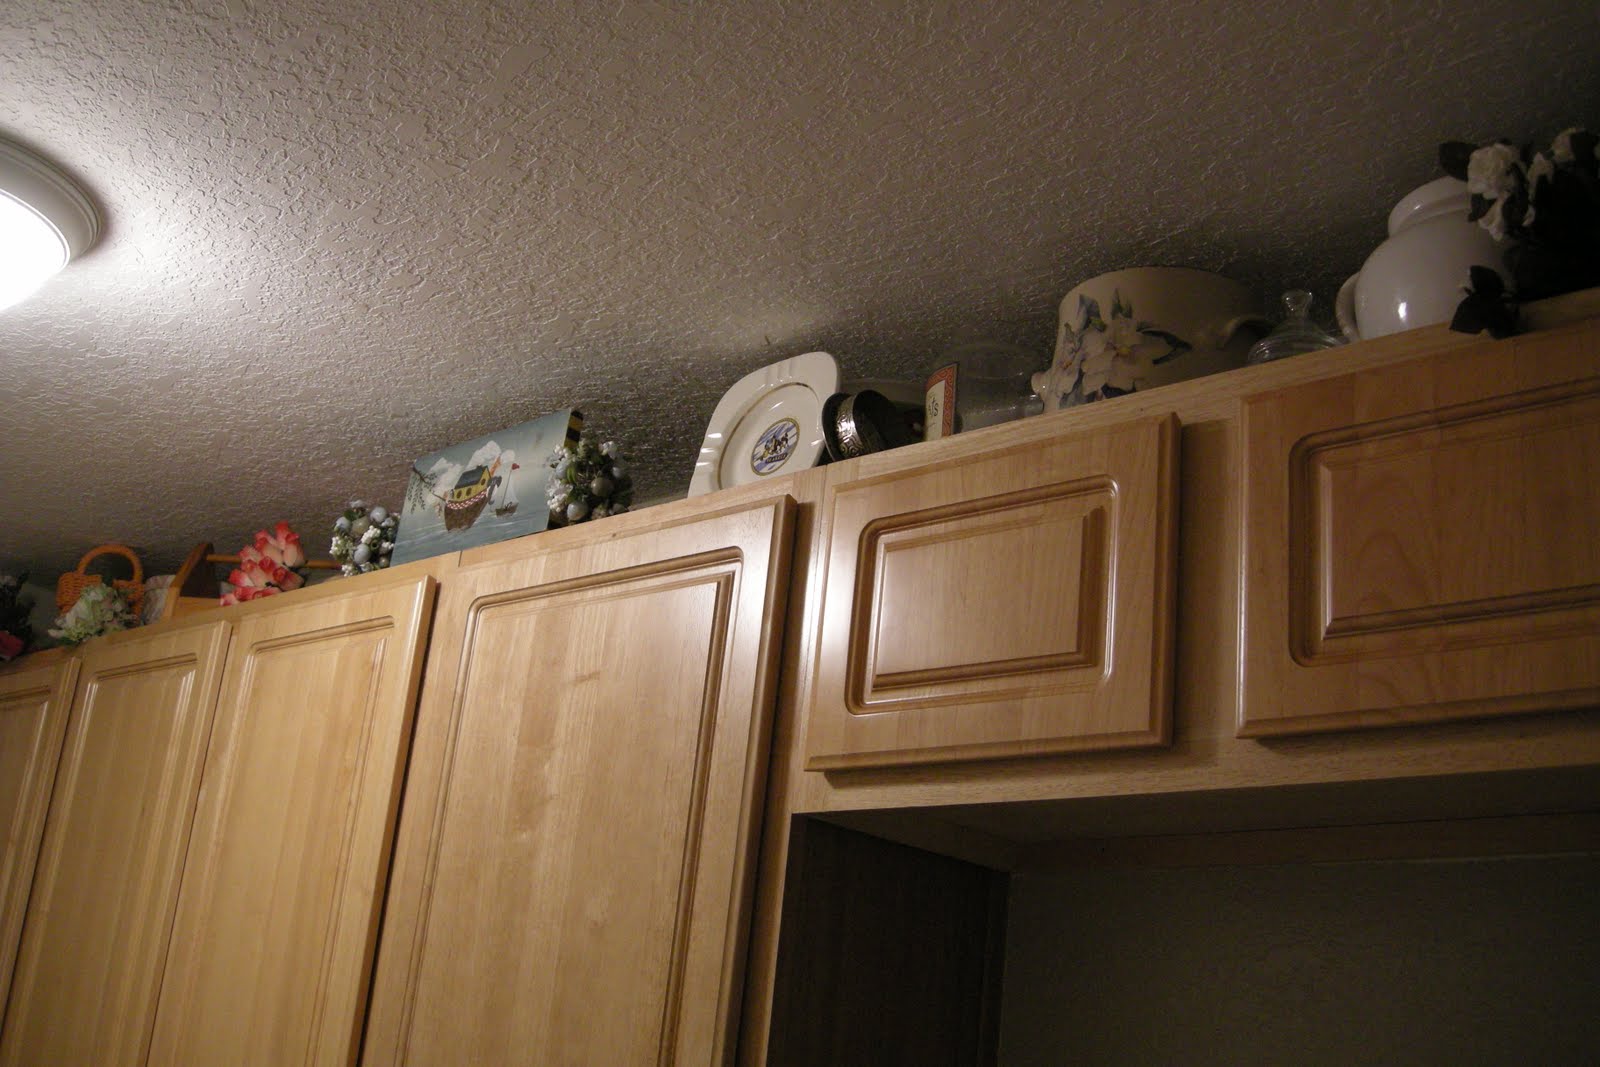 To complete the laundry room I needed to decorate the top of the cabinets 